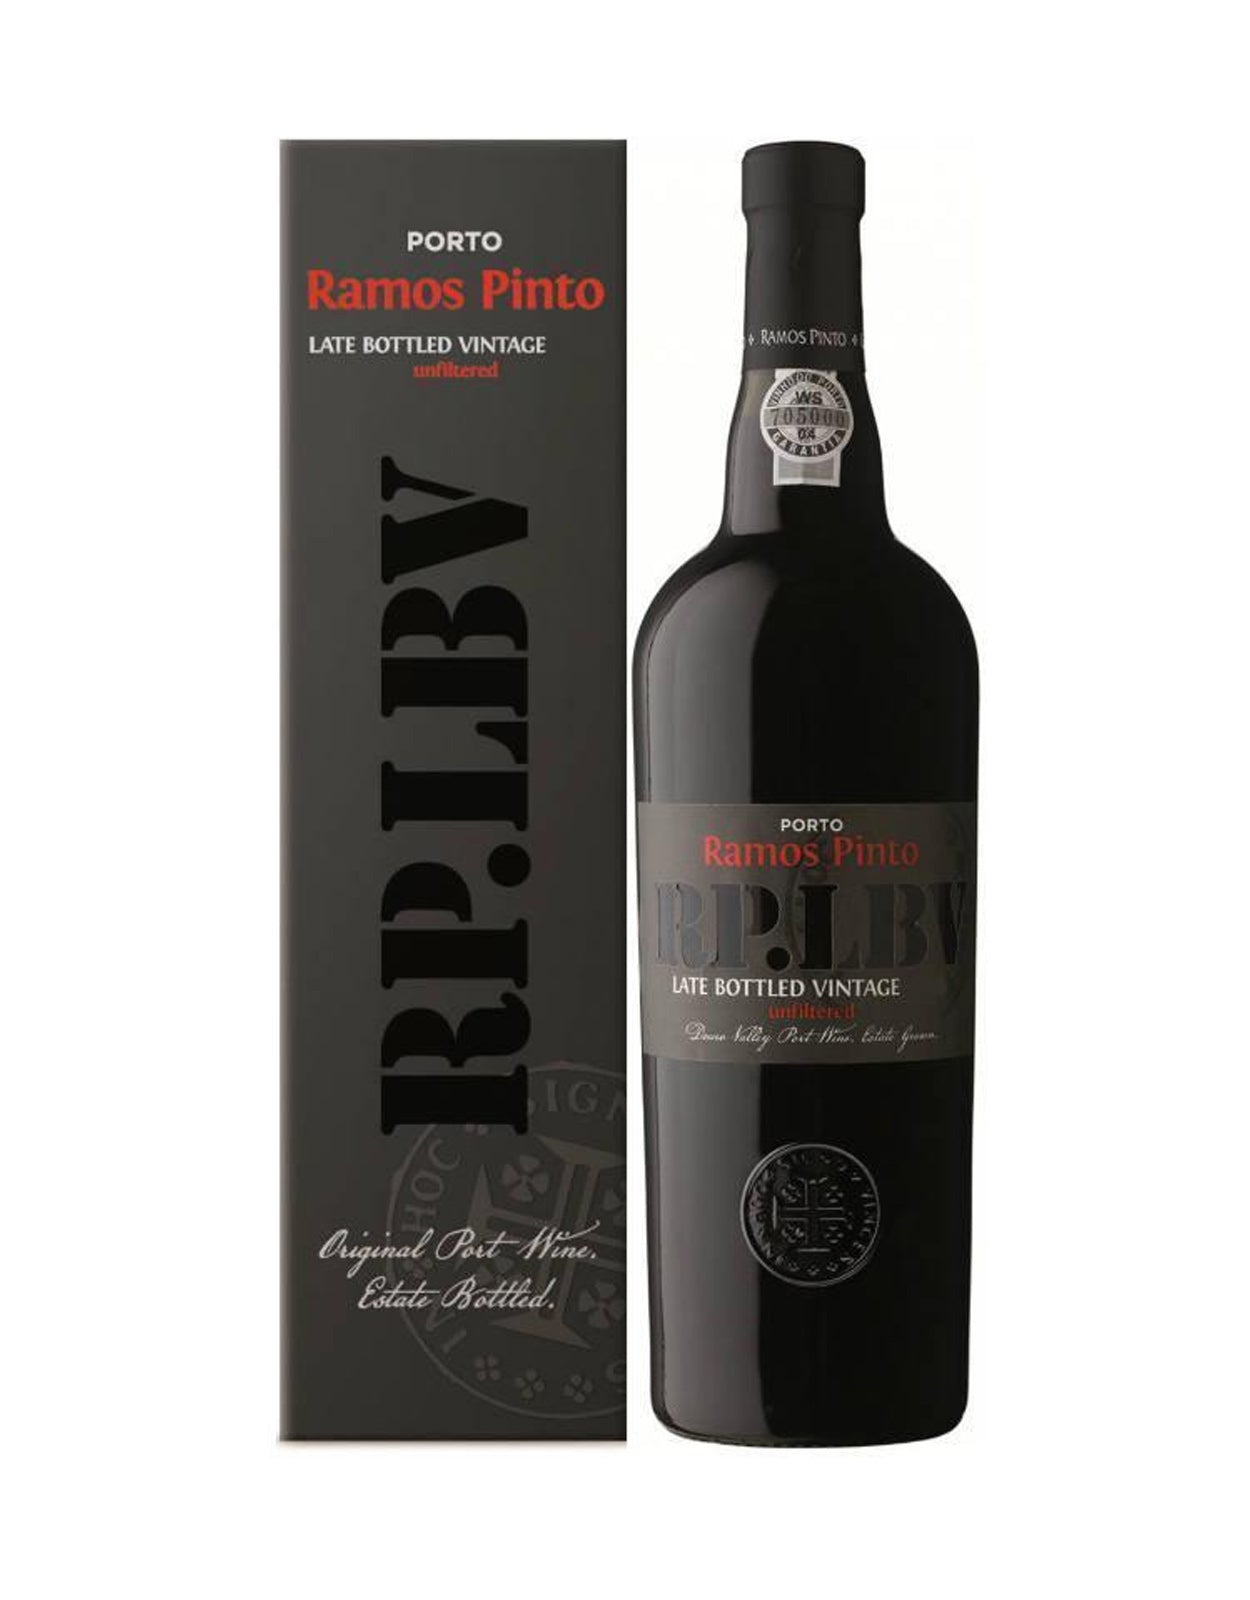 Ramos Pinto Late Bottled Vintage Port 2017